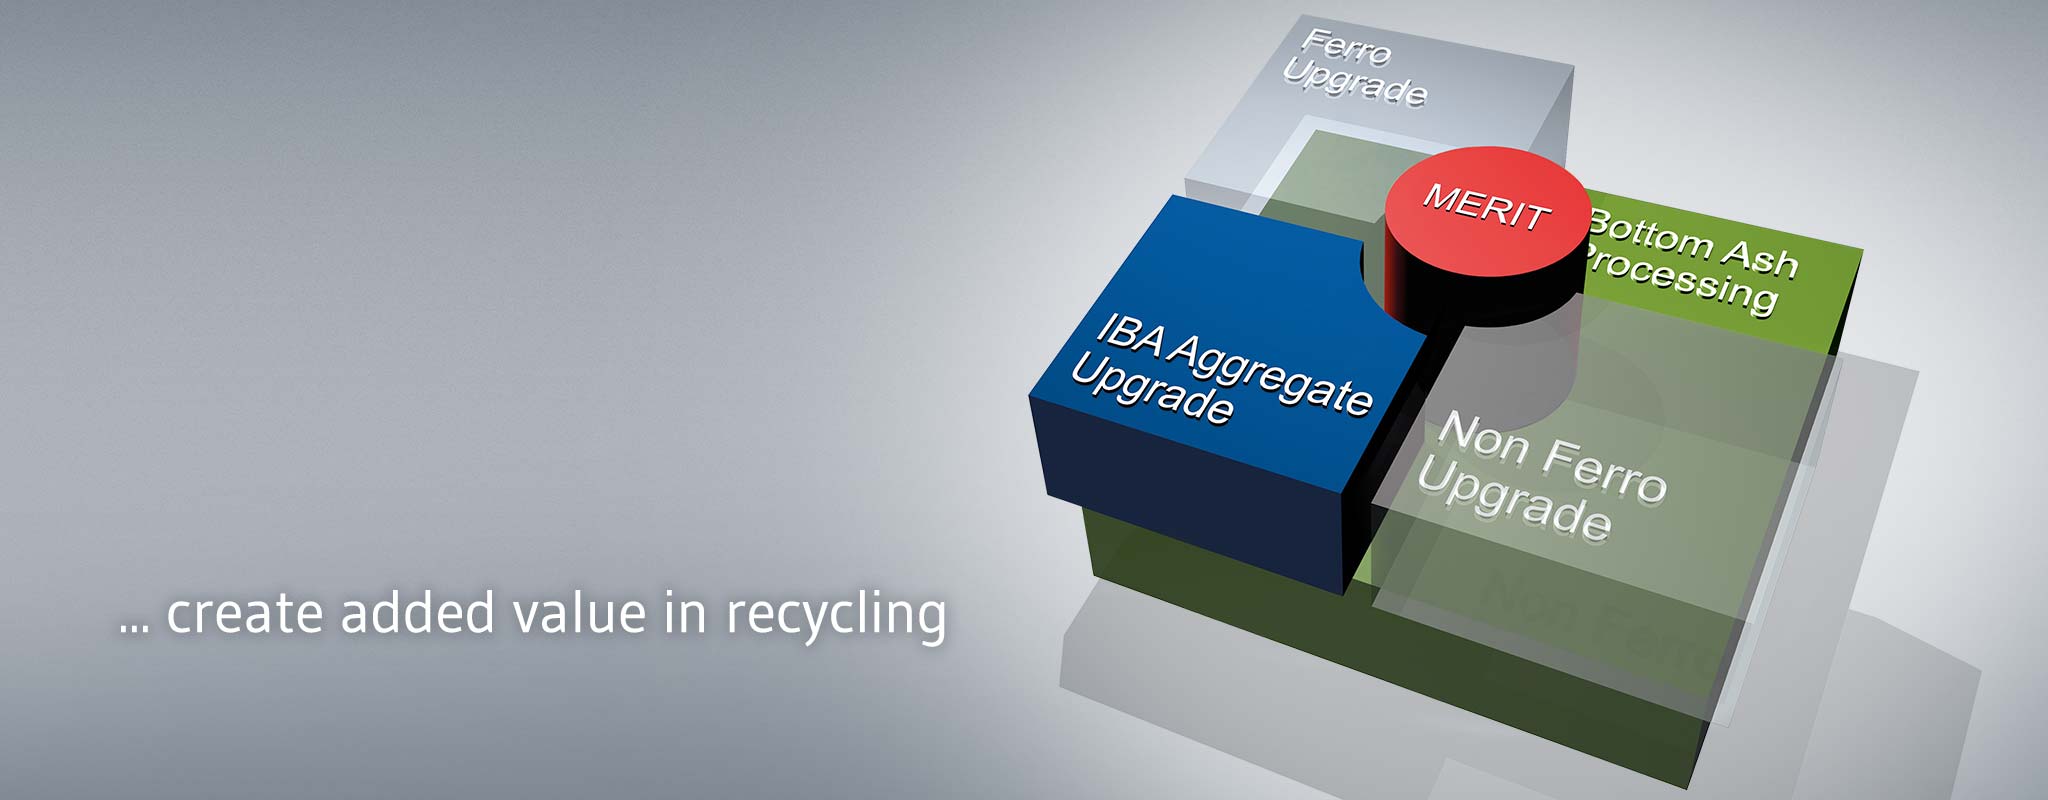 IBA recycling technologies optimise secondary aggregates and metal recovery rx_sol_home-slide_D_merit_EN_01b.jpg